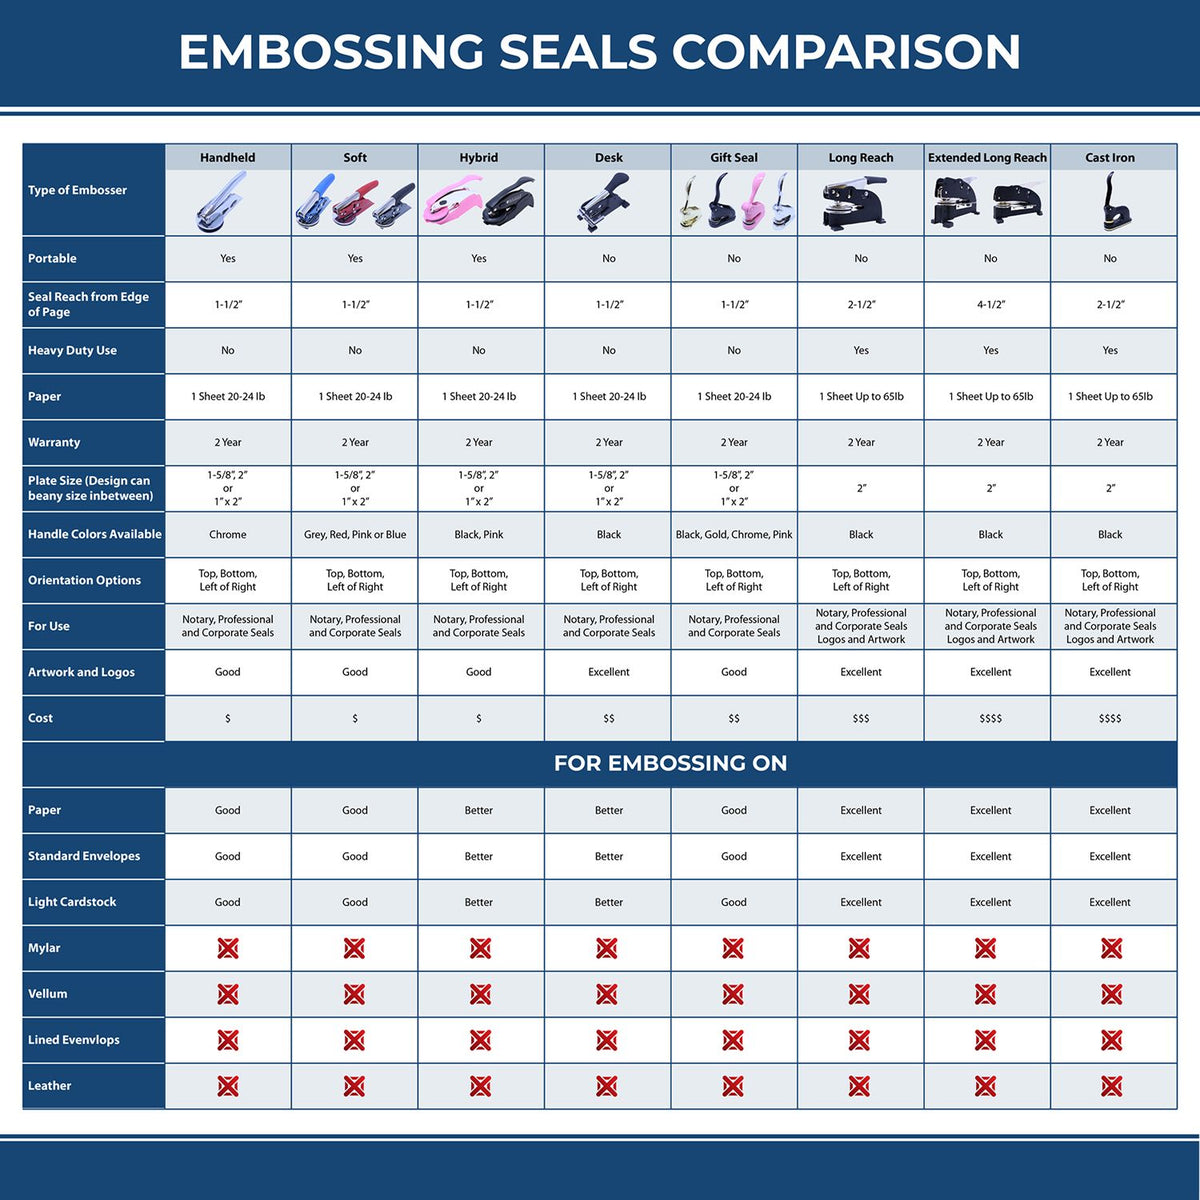 A comparison chart for the different types of mount models available for the Long Reach Minnesota PE Seal.